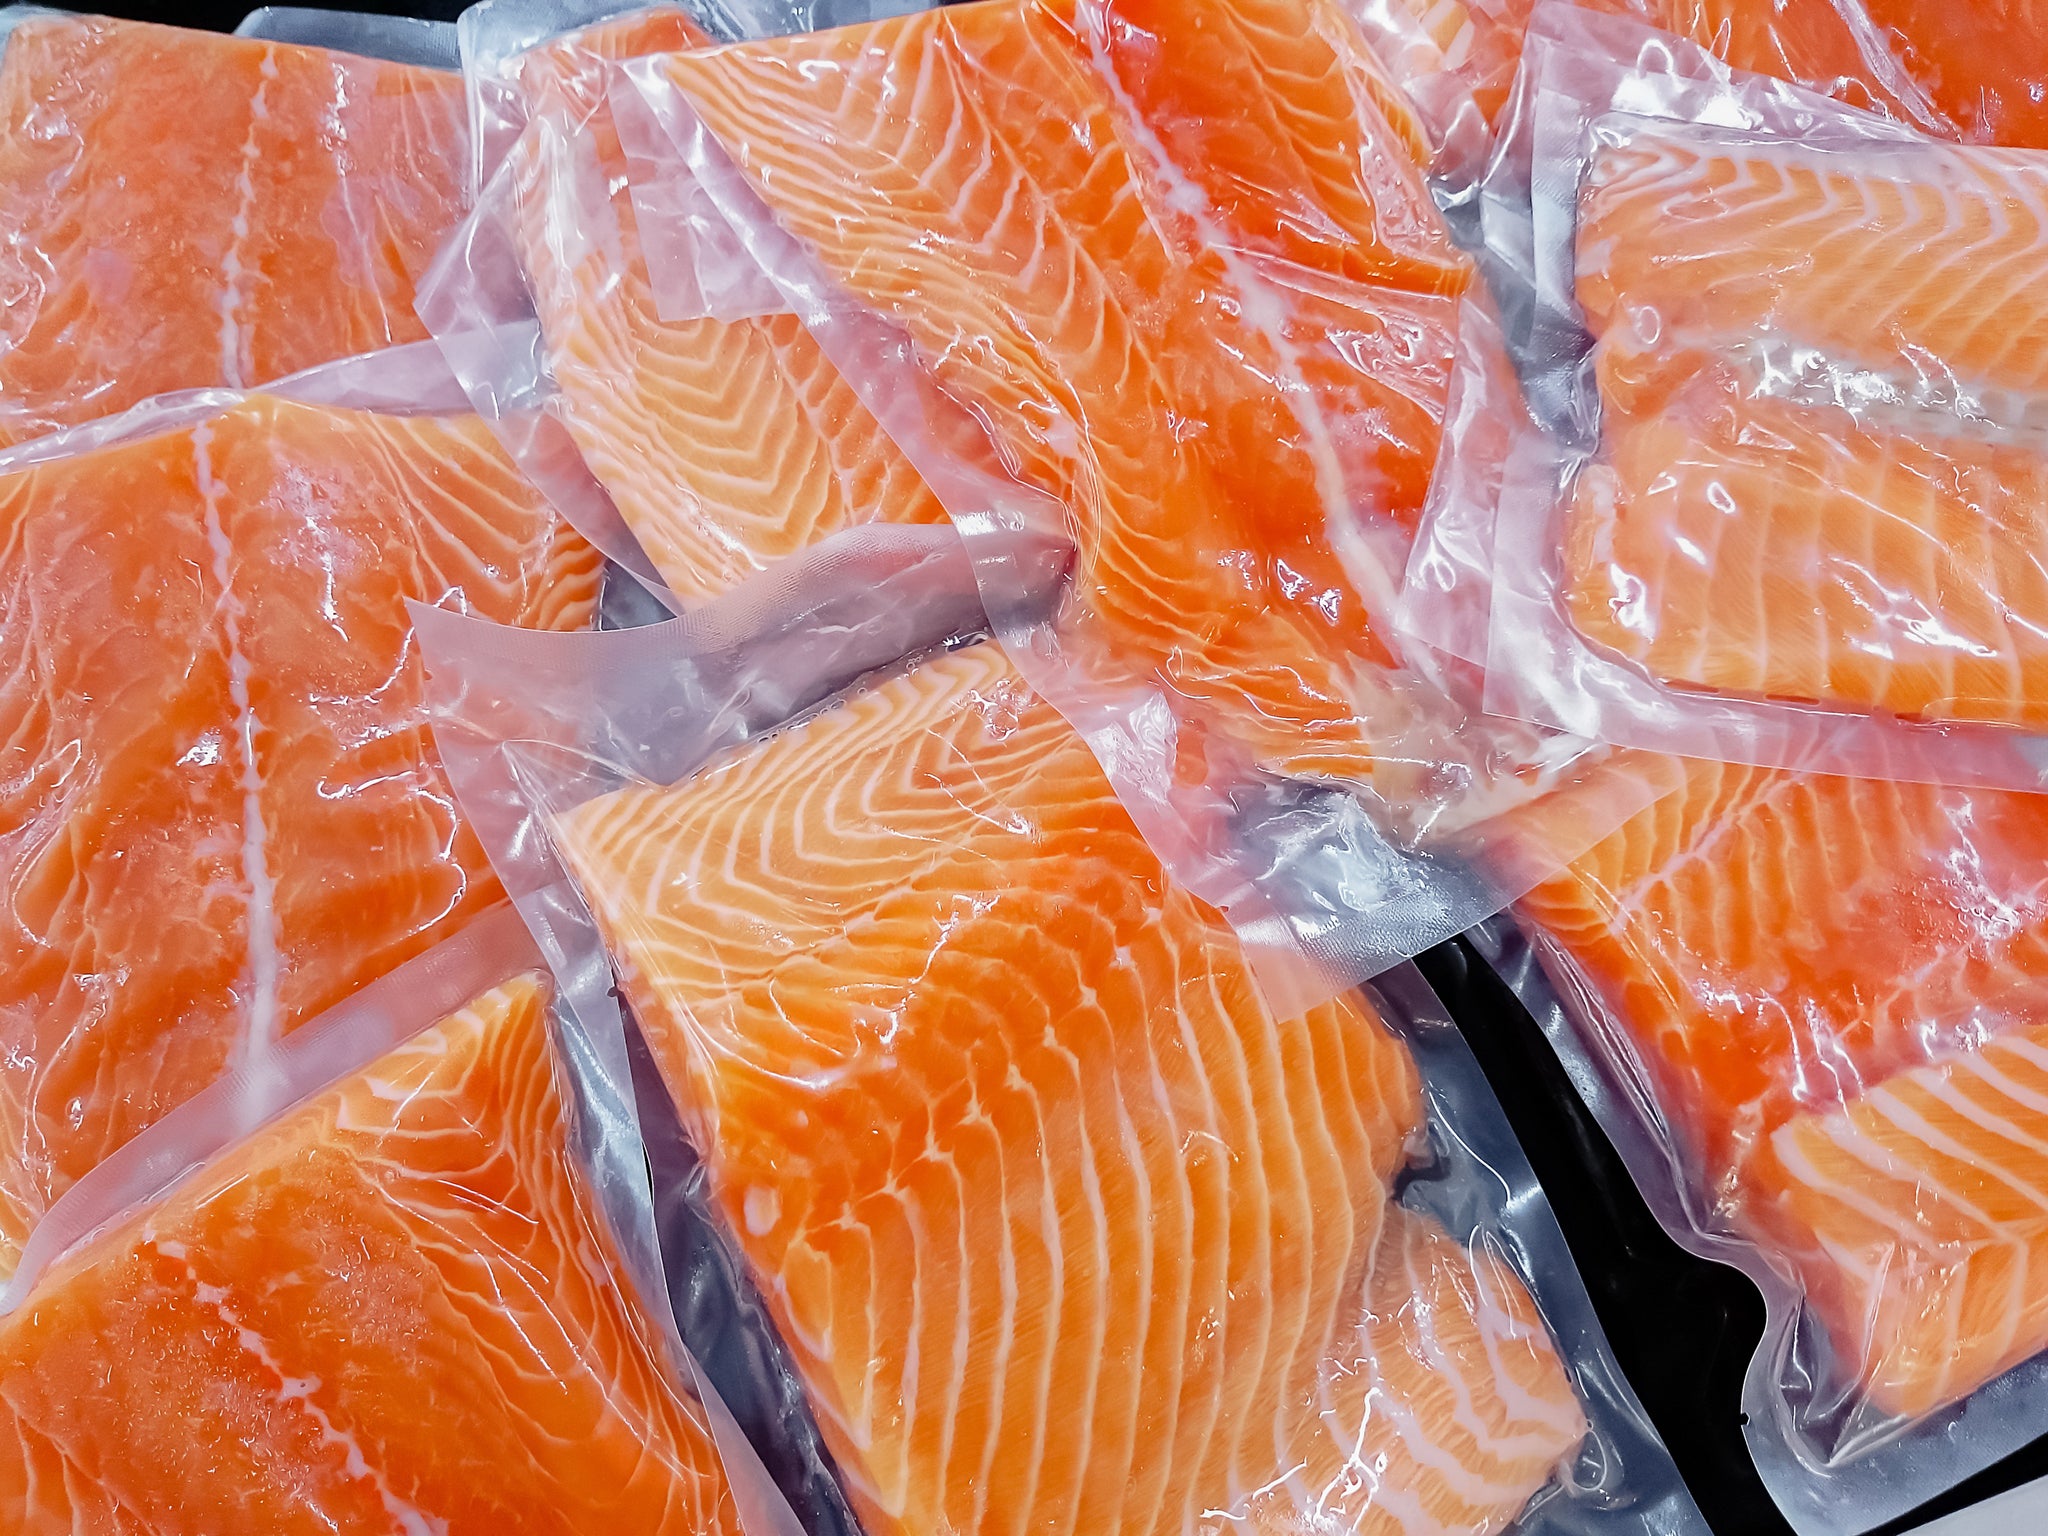 Salmon farming is the fastest growing food production system in the world - it accounts for 70% (2.5 million metric tons) of the market